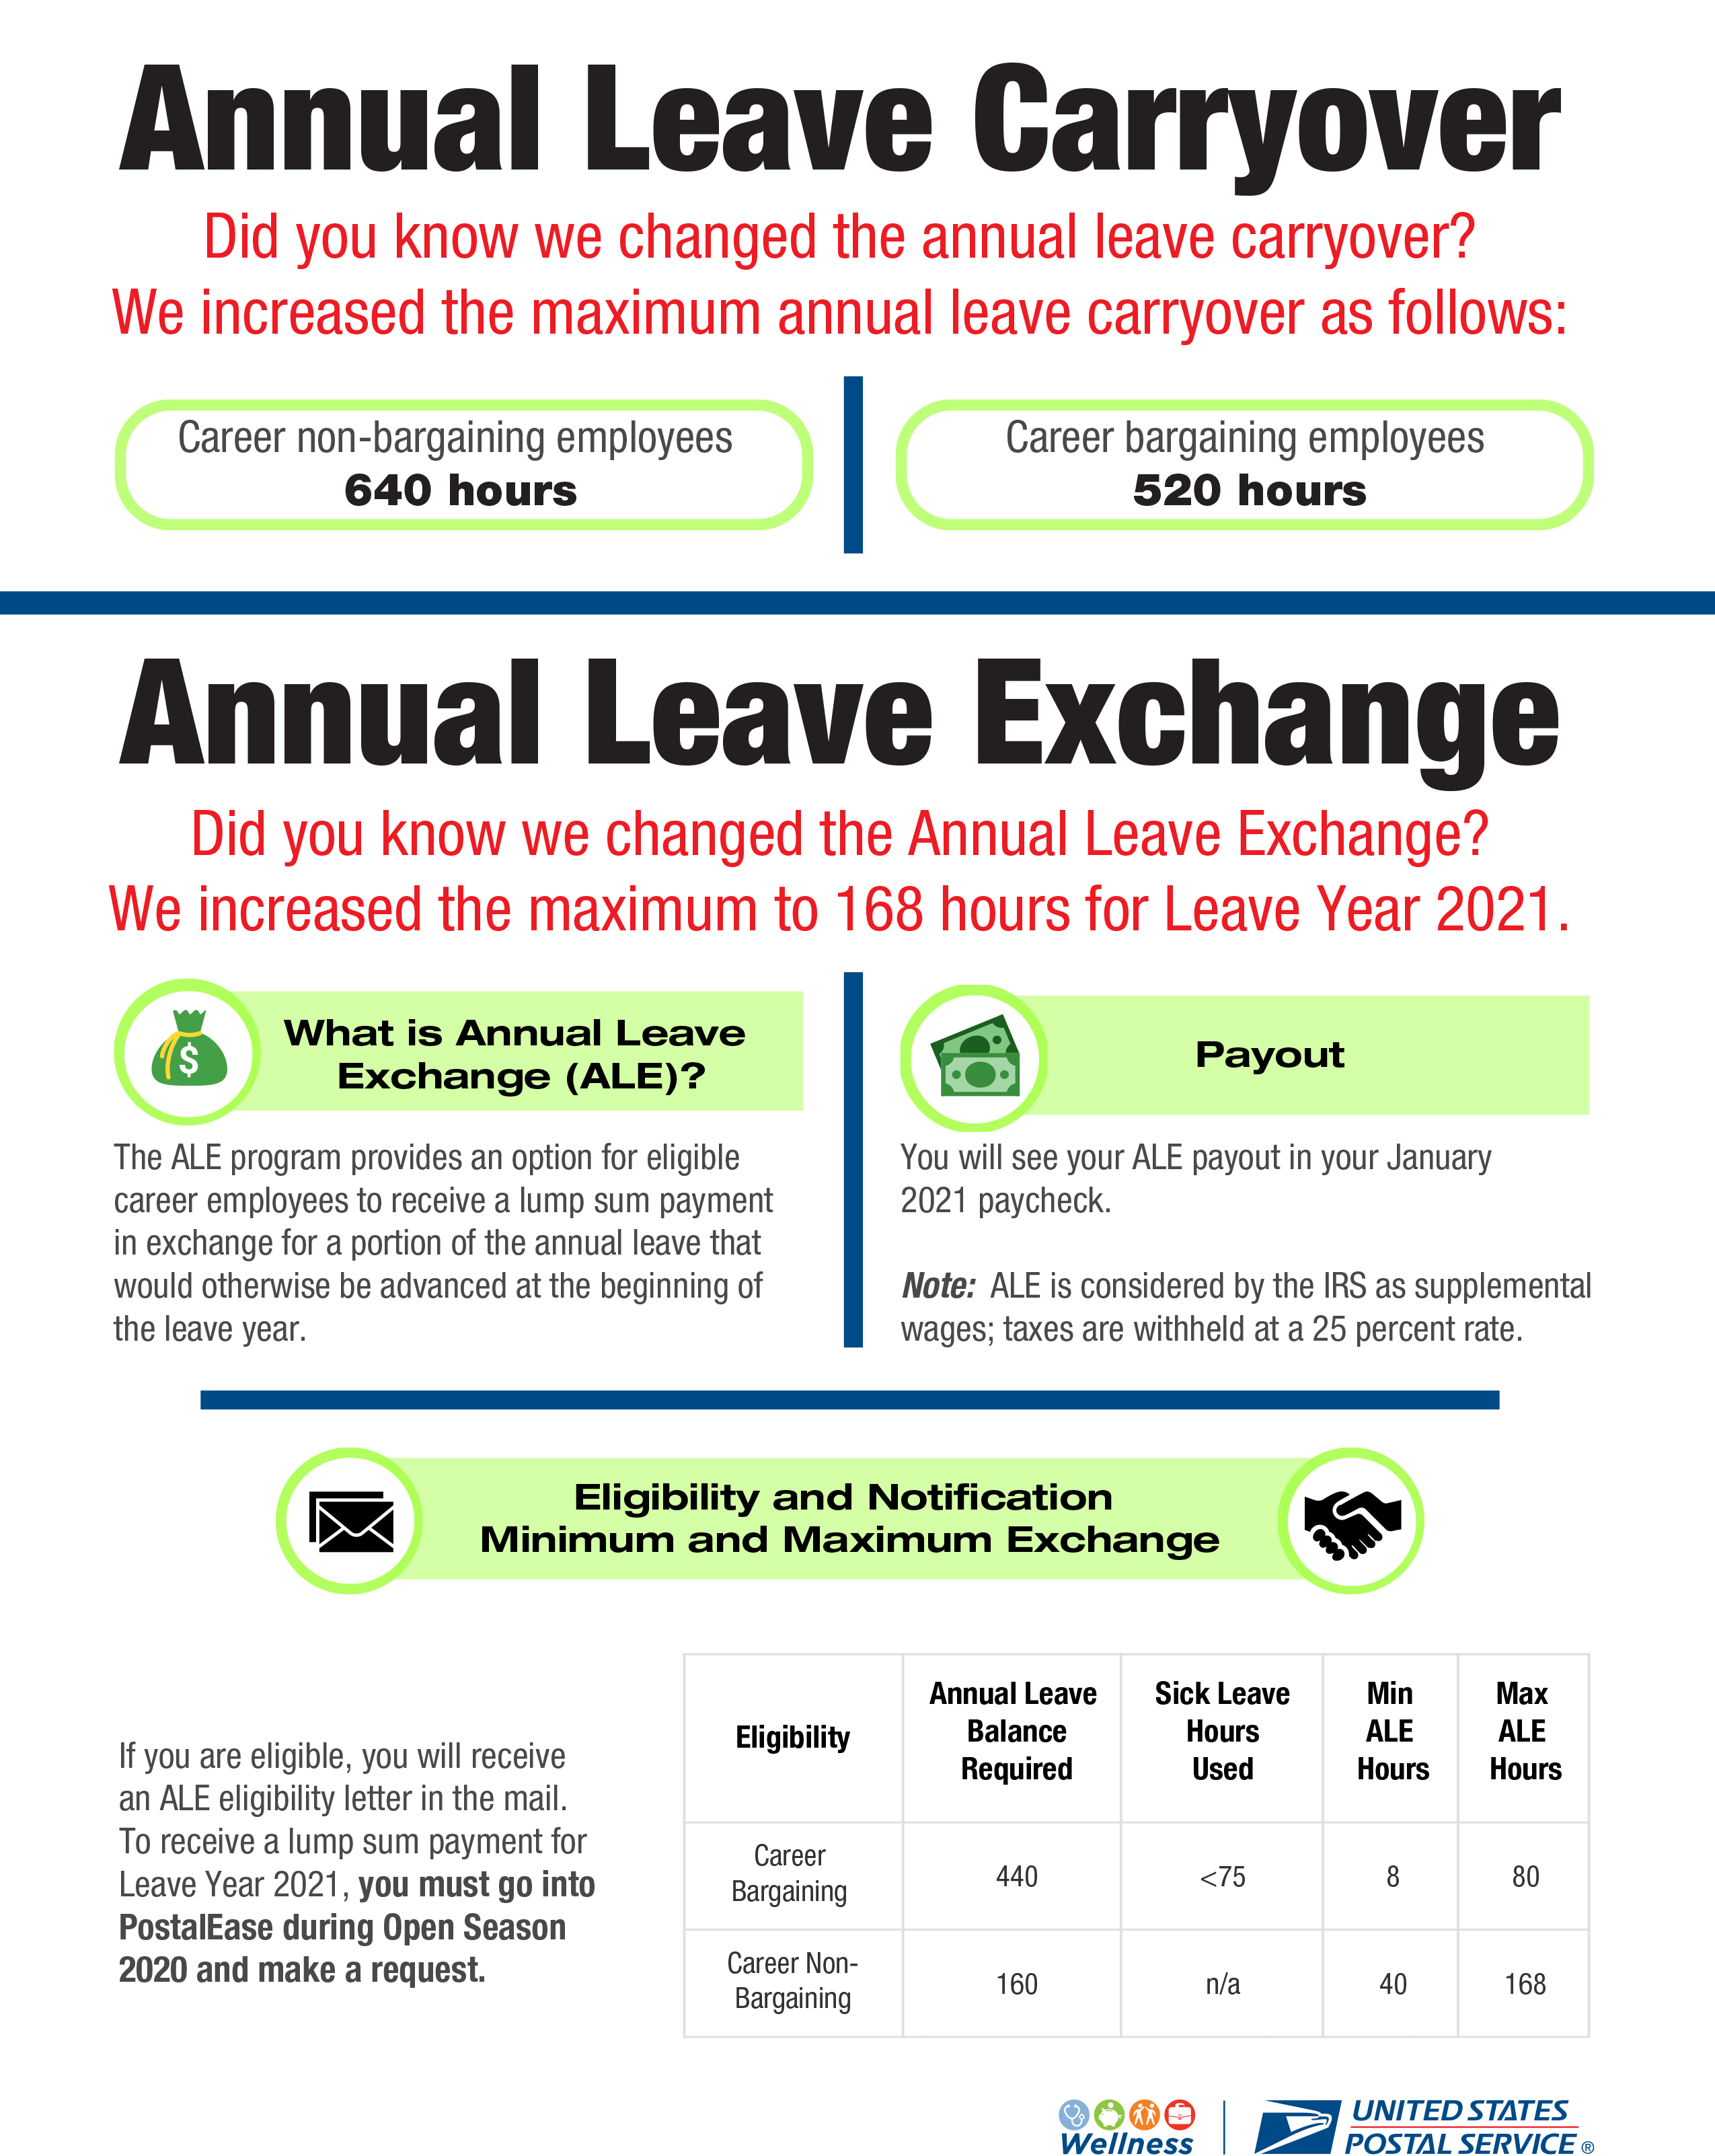 Flyer. Annual Leave Carryover. Did you know we change the annual leave caryyover. We increased the maximum annual leave carryover as follows: 1) Career non-bargaiining employees-640 hours. 2) Career bargainng employees - 520 hours. Did you you know we change the Annual Leave Exchange? We increased the maximum to 168 hours for Leave Year 2021.